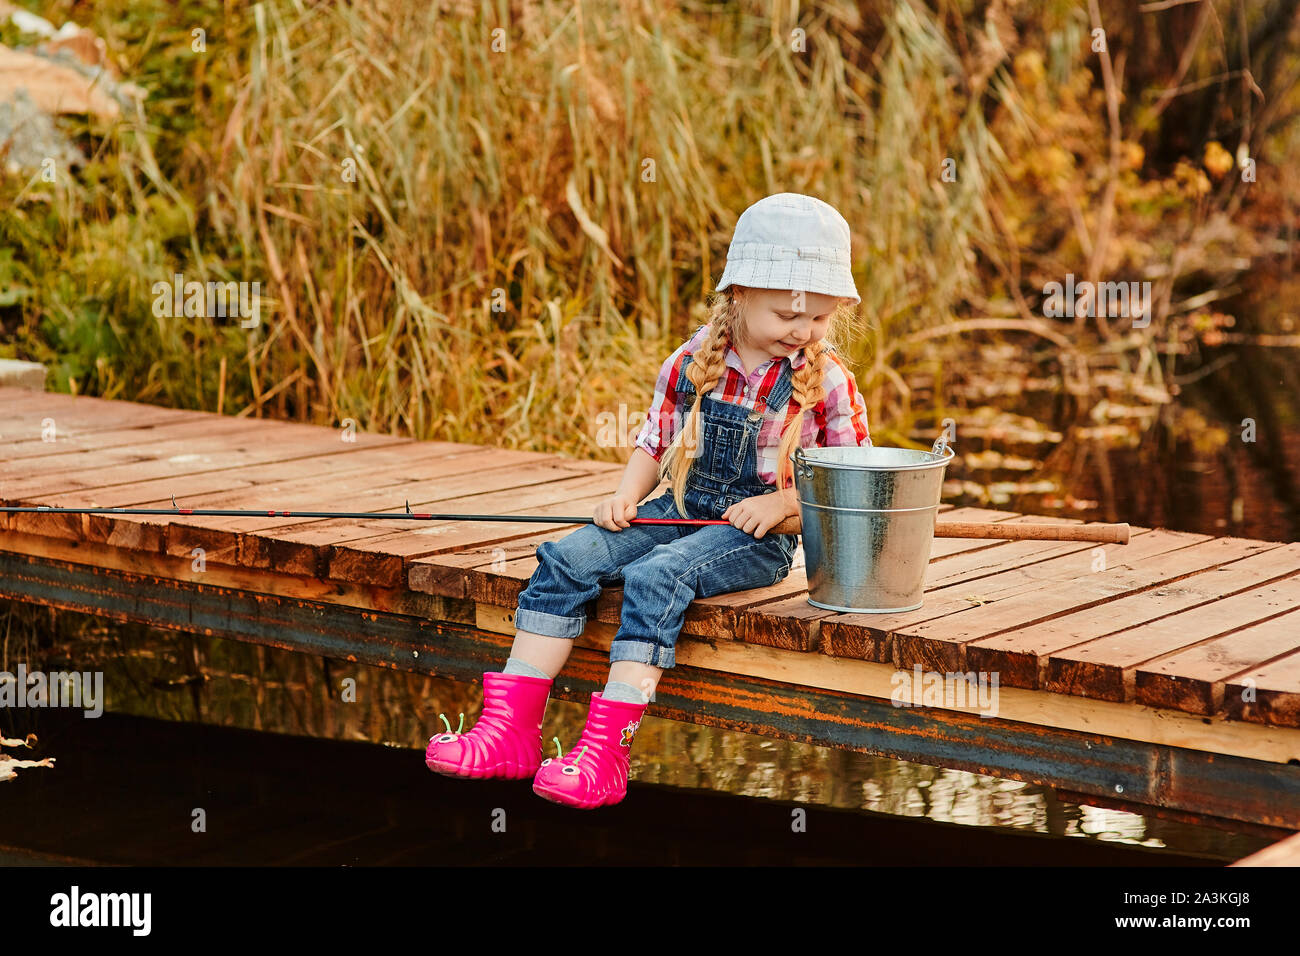 A little girl with a fishing rod looks at the catch of fish in a bucket  Stock Photo - Alamy